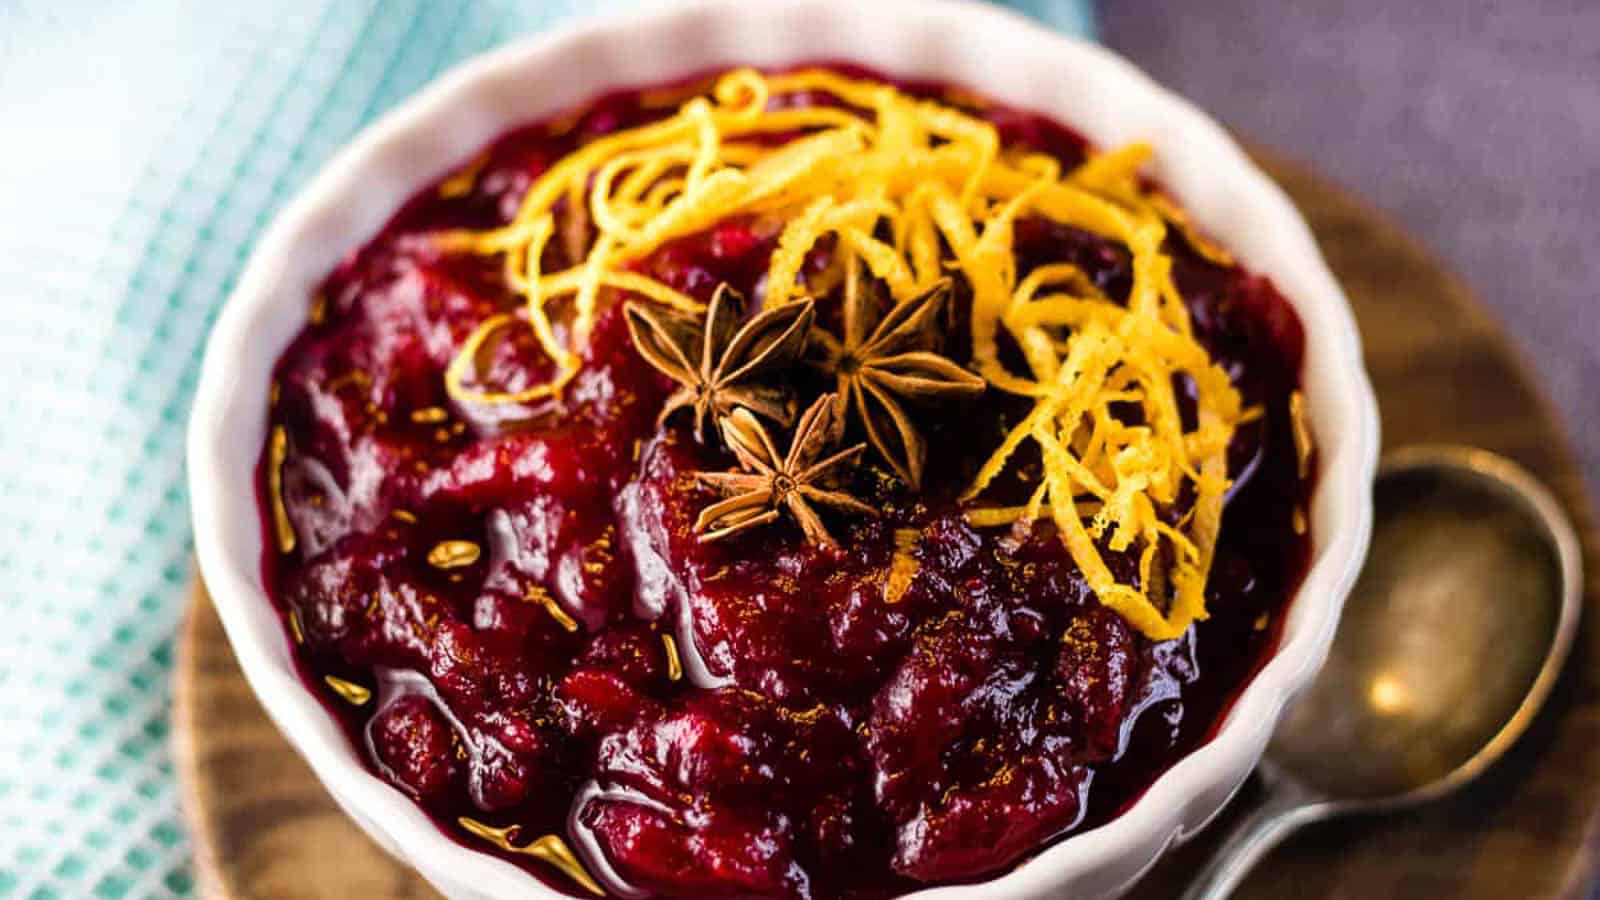 Cranberry sauce in a white bowl garnished with orange zest and star anise pods.